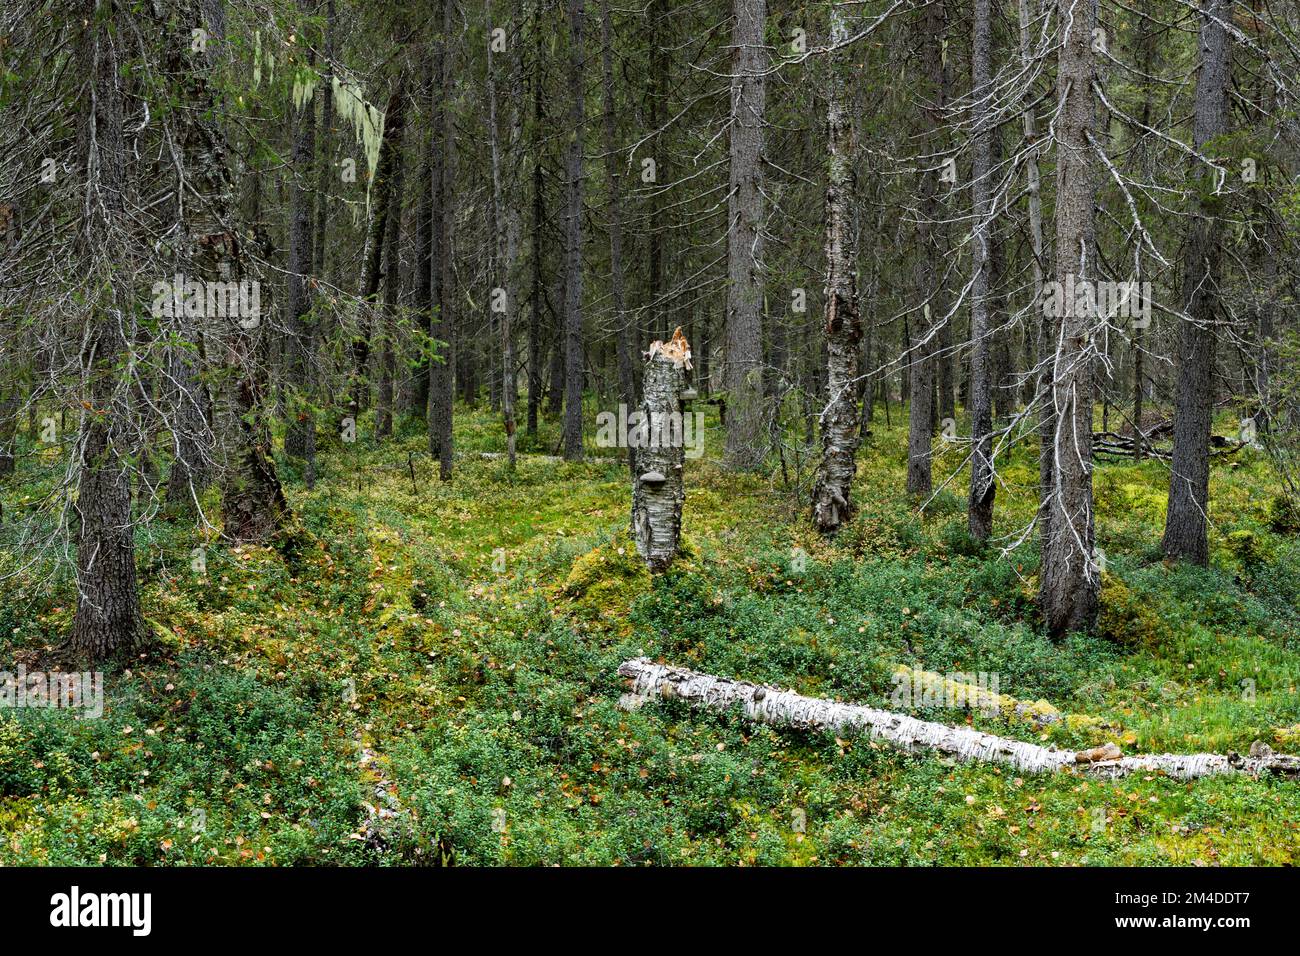 A Northern primeval forest with old conifer trees and deadwood in Oulanka National Park, Northern Finland Stock Photo